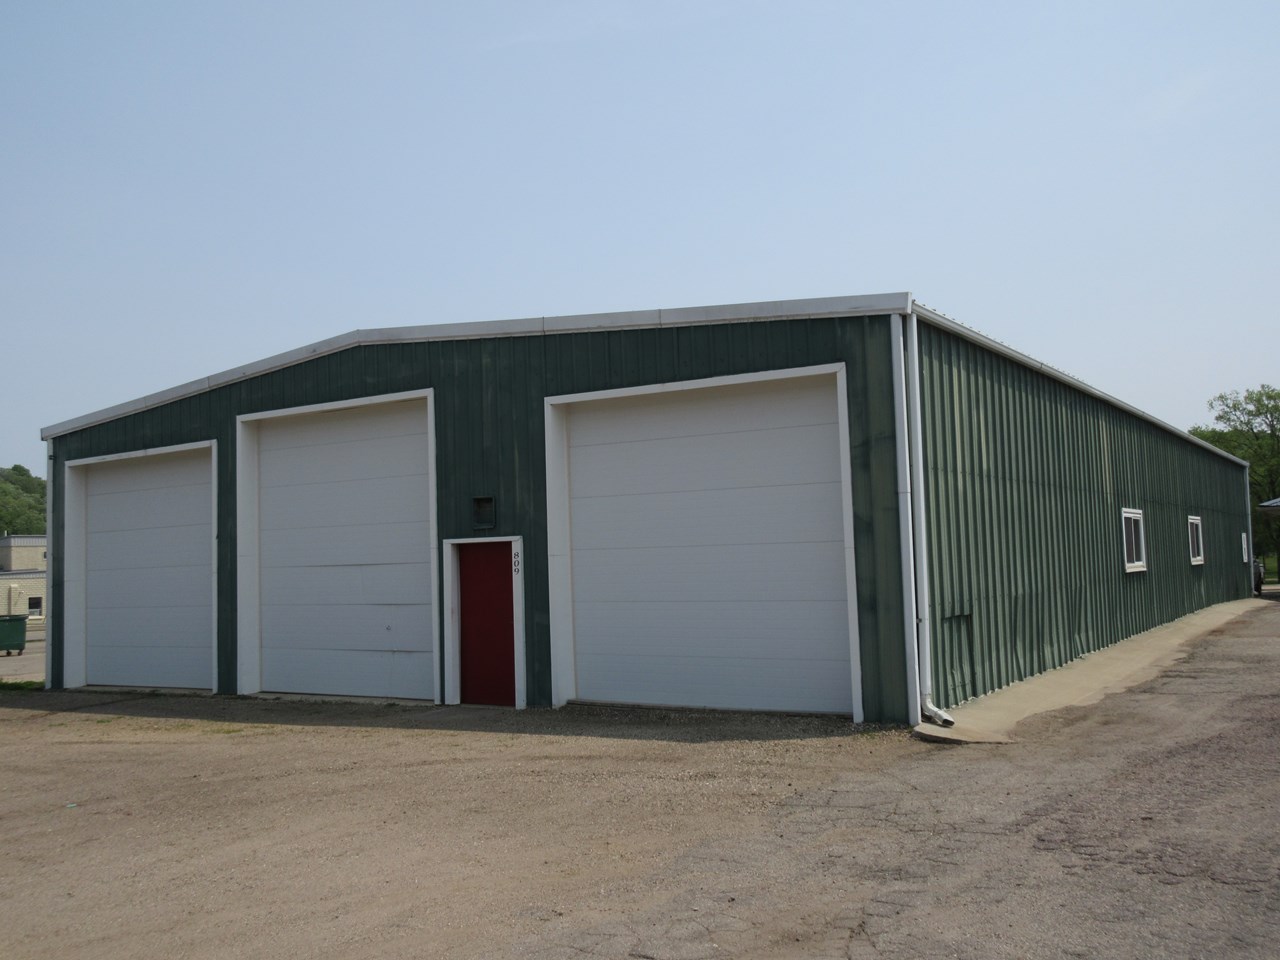 fourth st side 3 overhead doors, all 12' wide